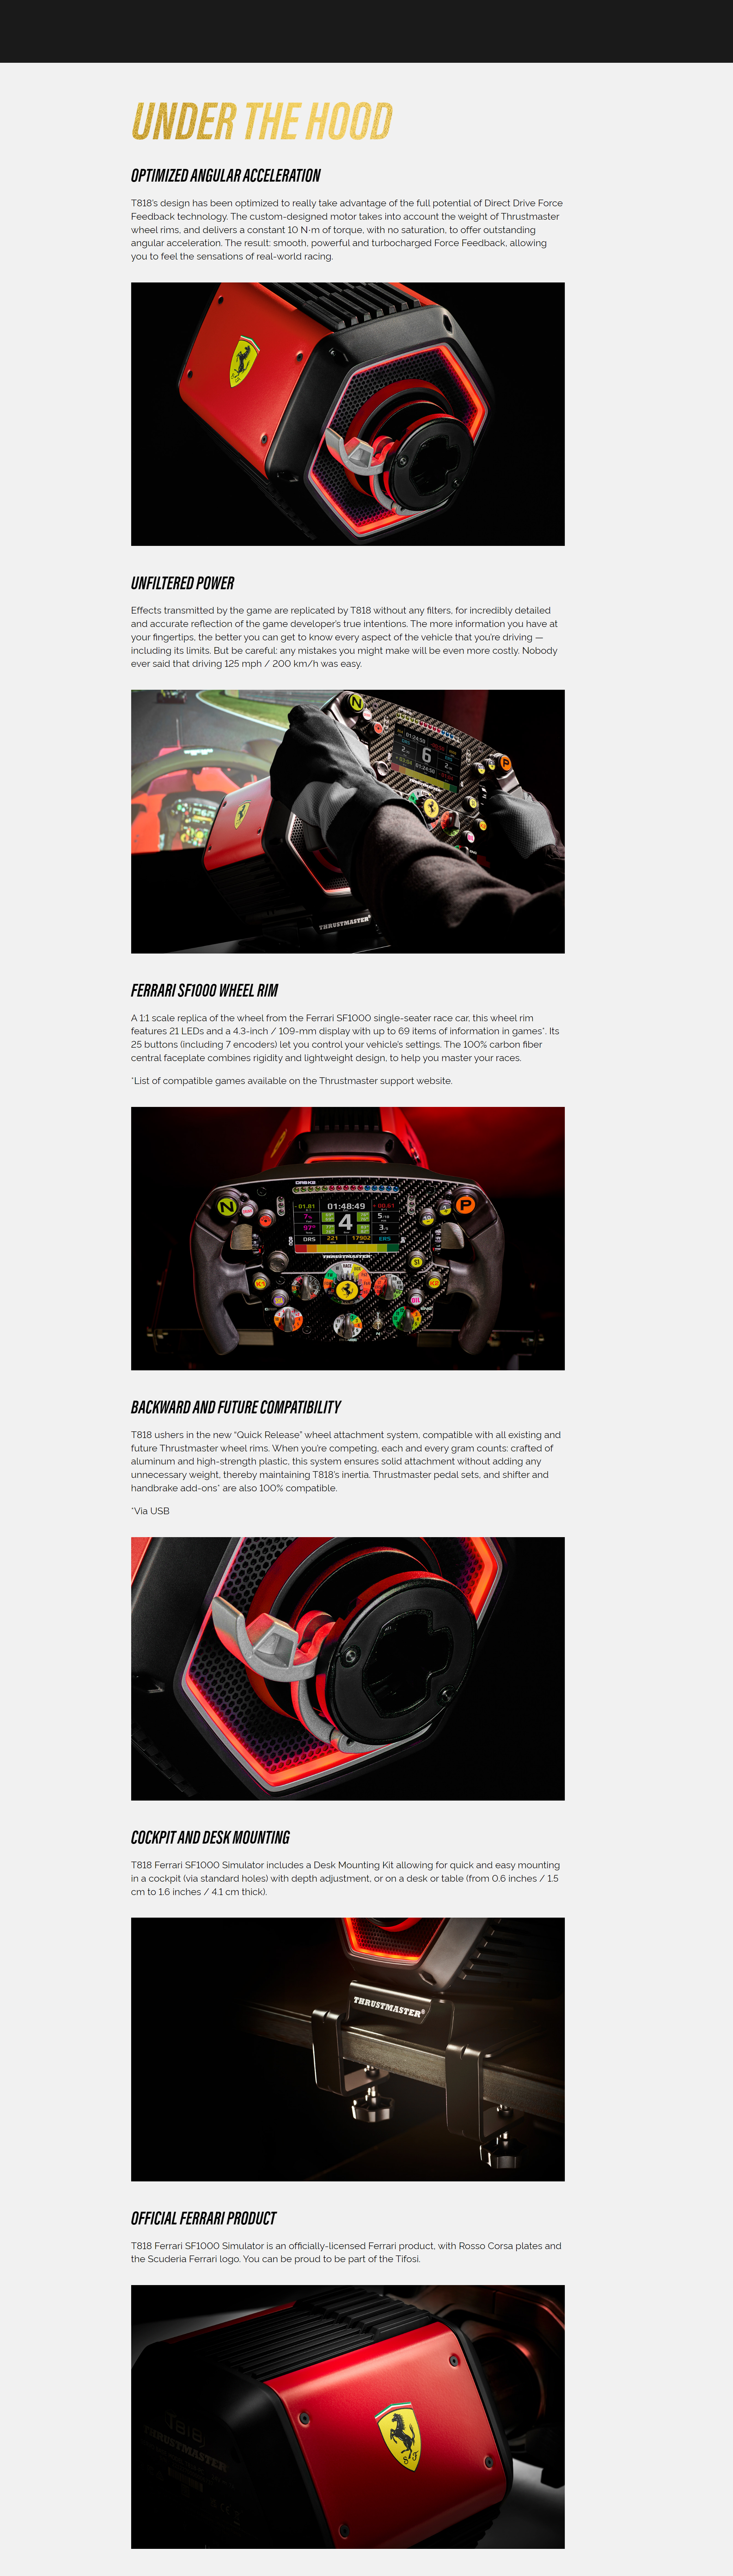 A large marketing image providing additional information about the product Thrustmaster T818 Ferrari SF1000 - Simulator Bundle - Additional alt info not provided